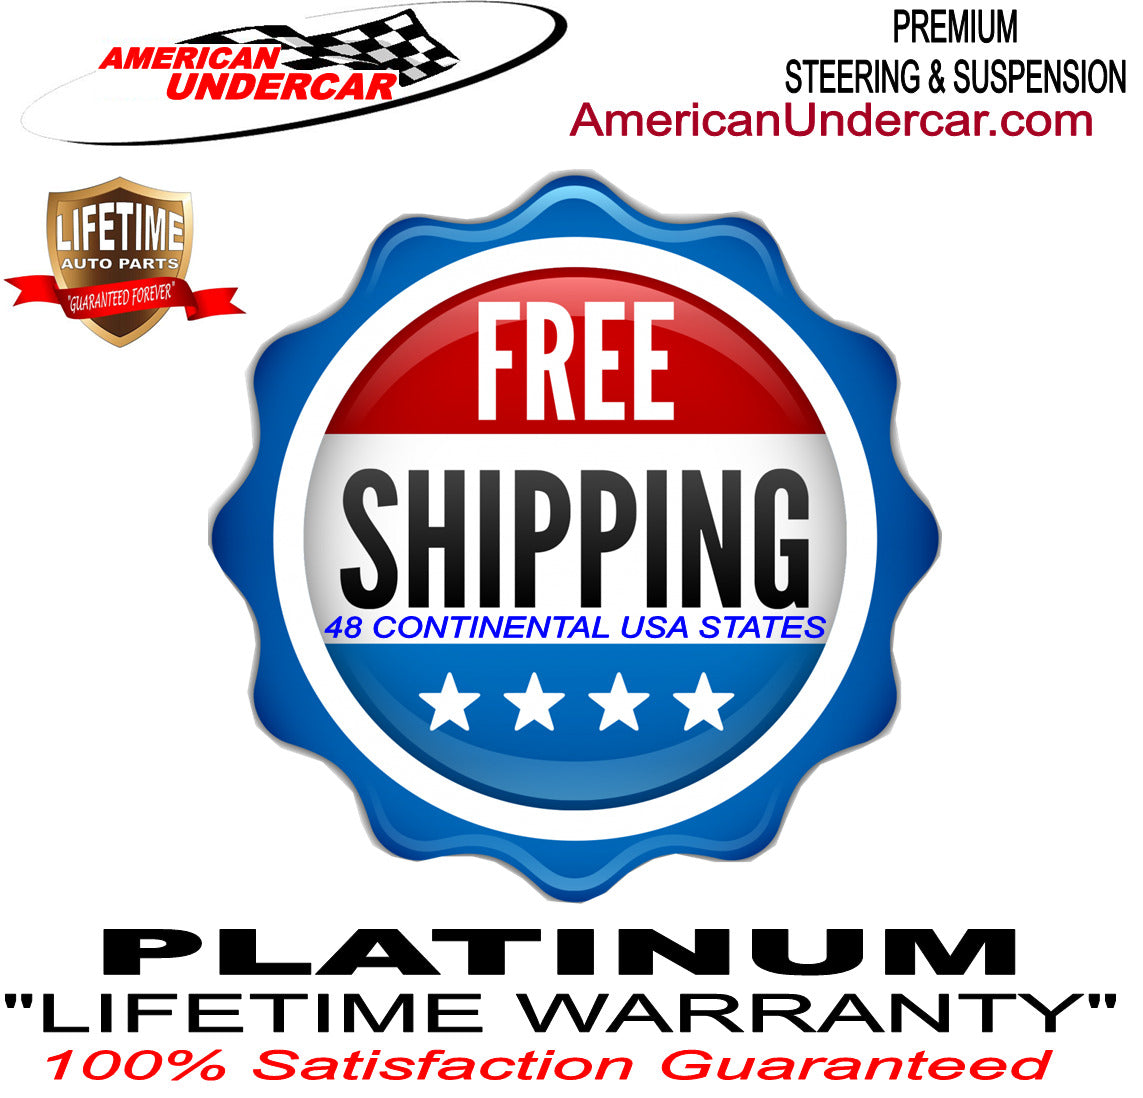 Lifetime Steering and Suspension Kit for 2001-2010 Chevrolet Silverado 2500HD 4x4